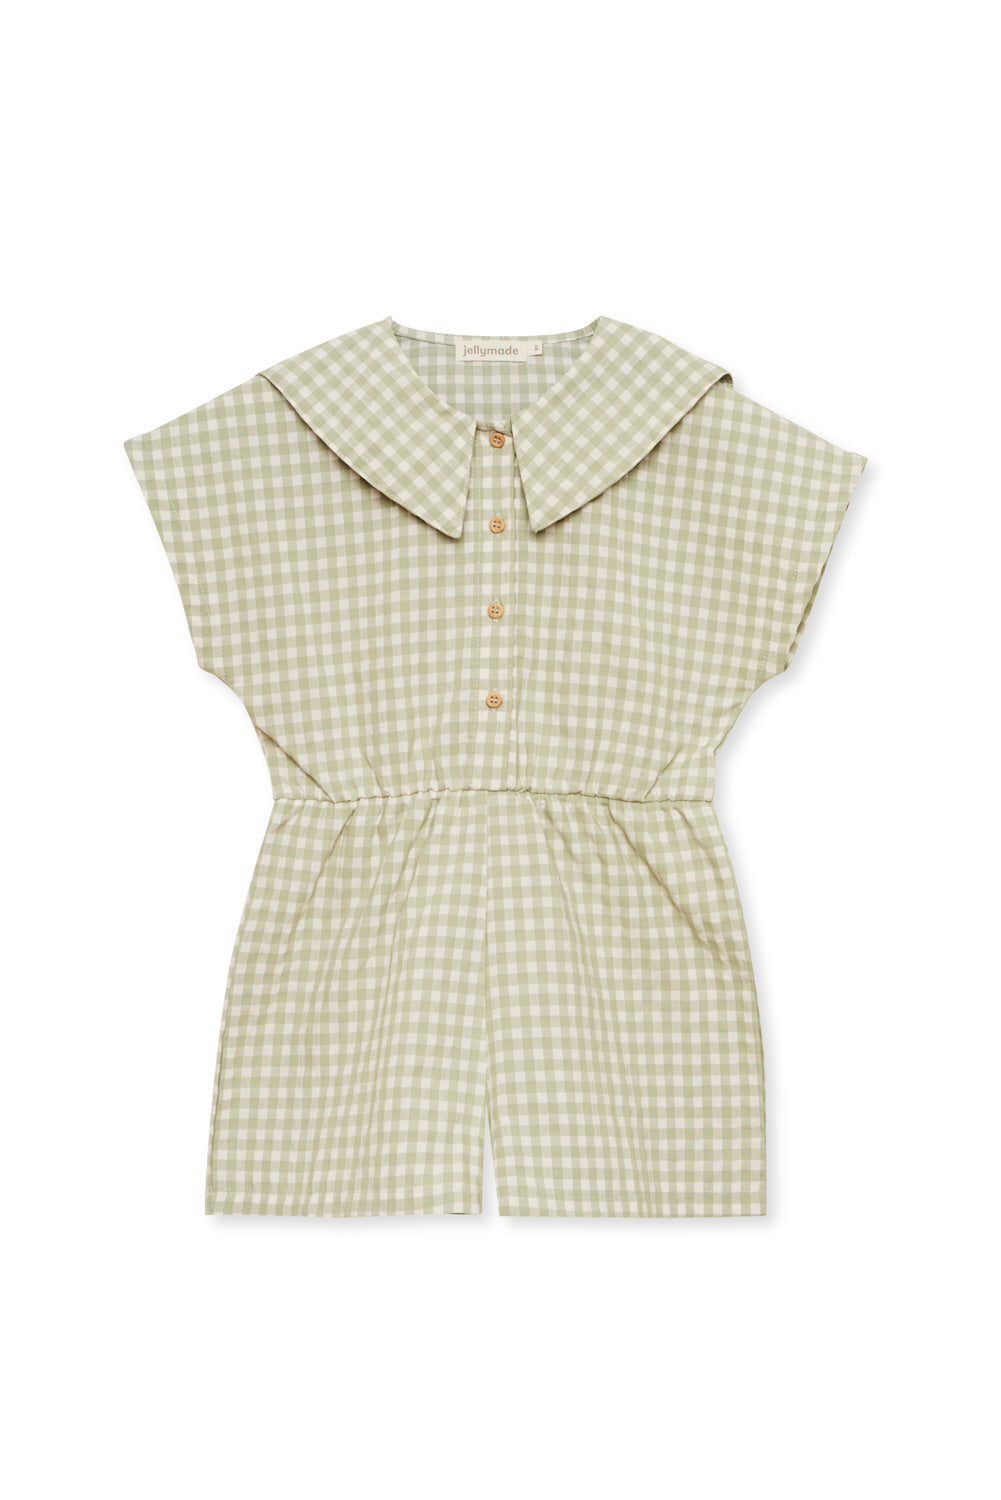 Beebe Overall Tea Green Checks Jumpsuits Jellymade 